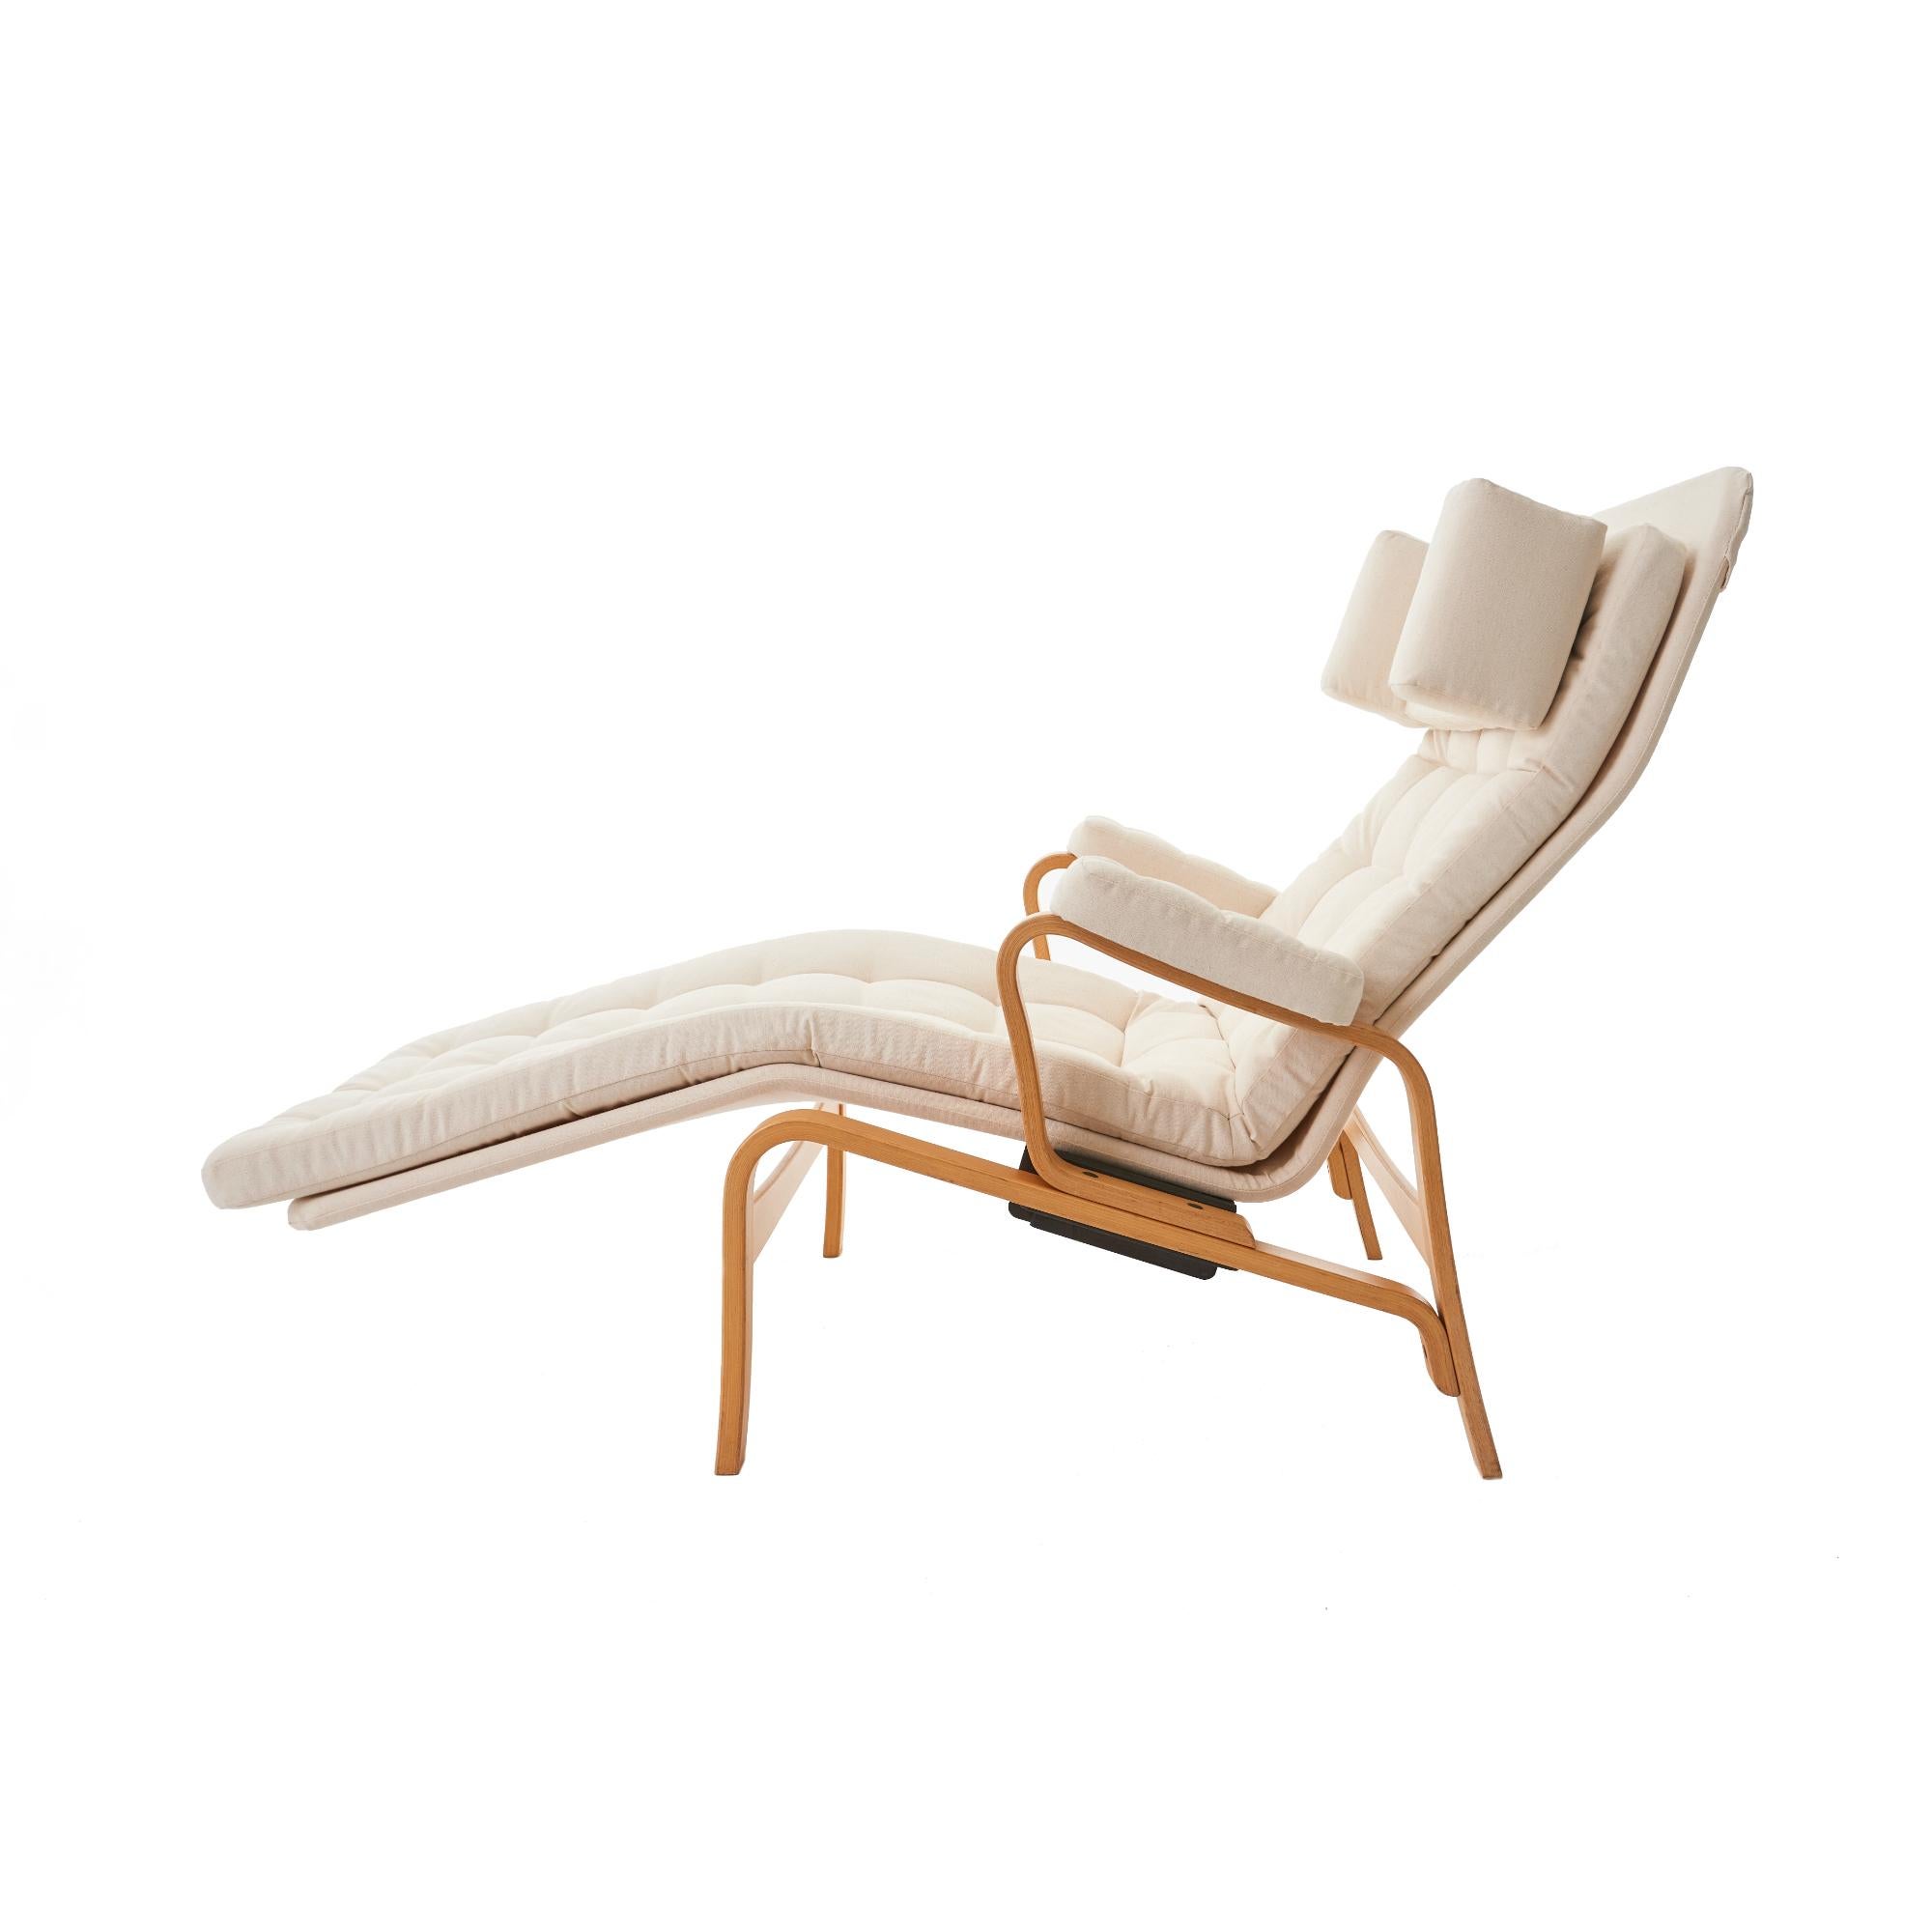 Sleek and beautiful bentwood 1970s Fenix reclining lounge chair designed by Sam Larsson for DUX Sweden. Newly upholstered with a cream duck canvas, the original ‘dux’ fabric lining has been retained for authenticity. The reclining mechanism is in